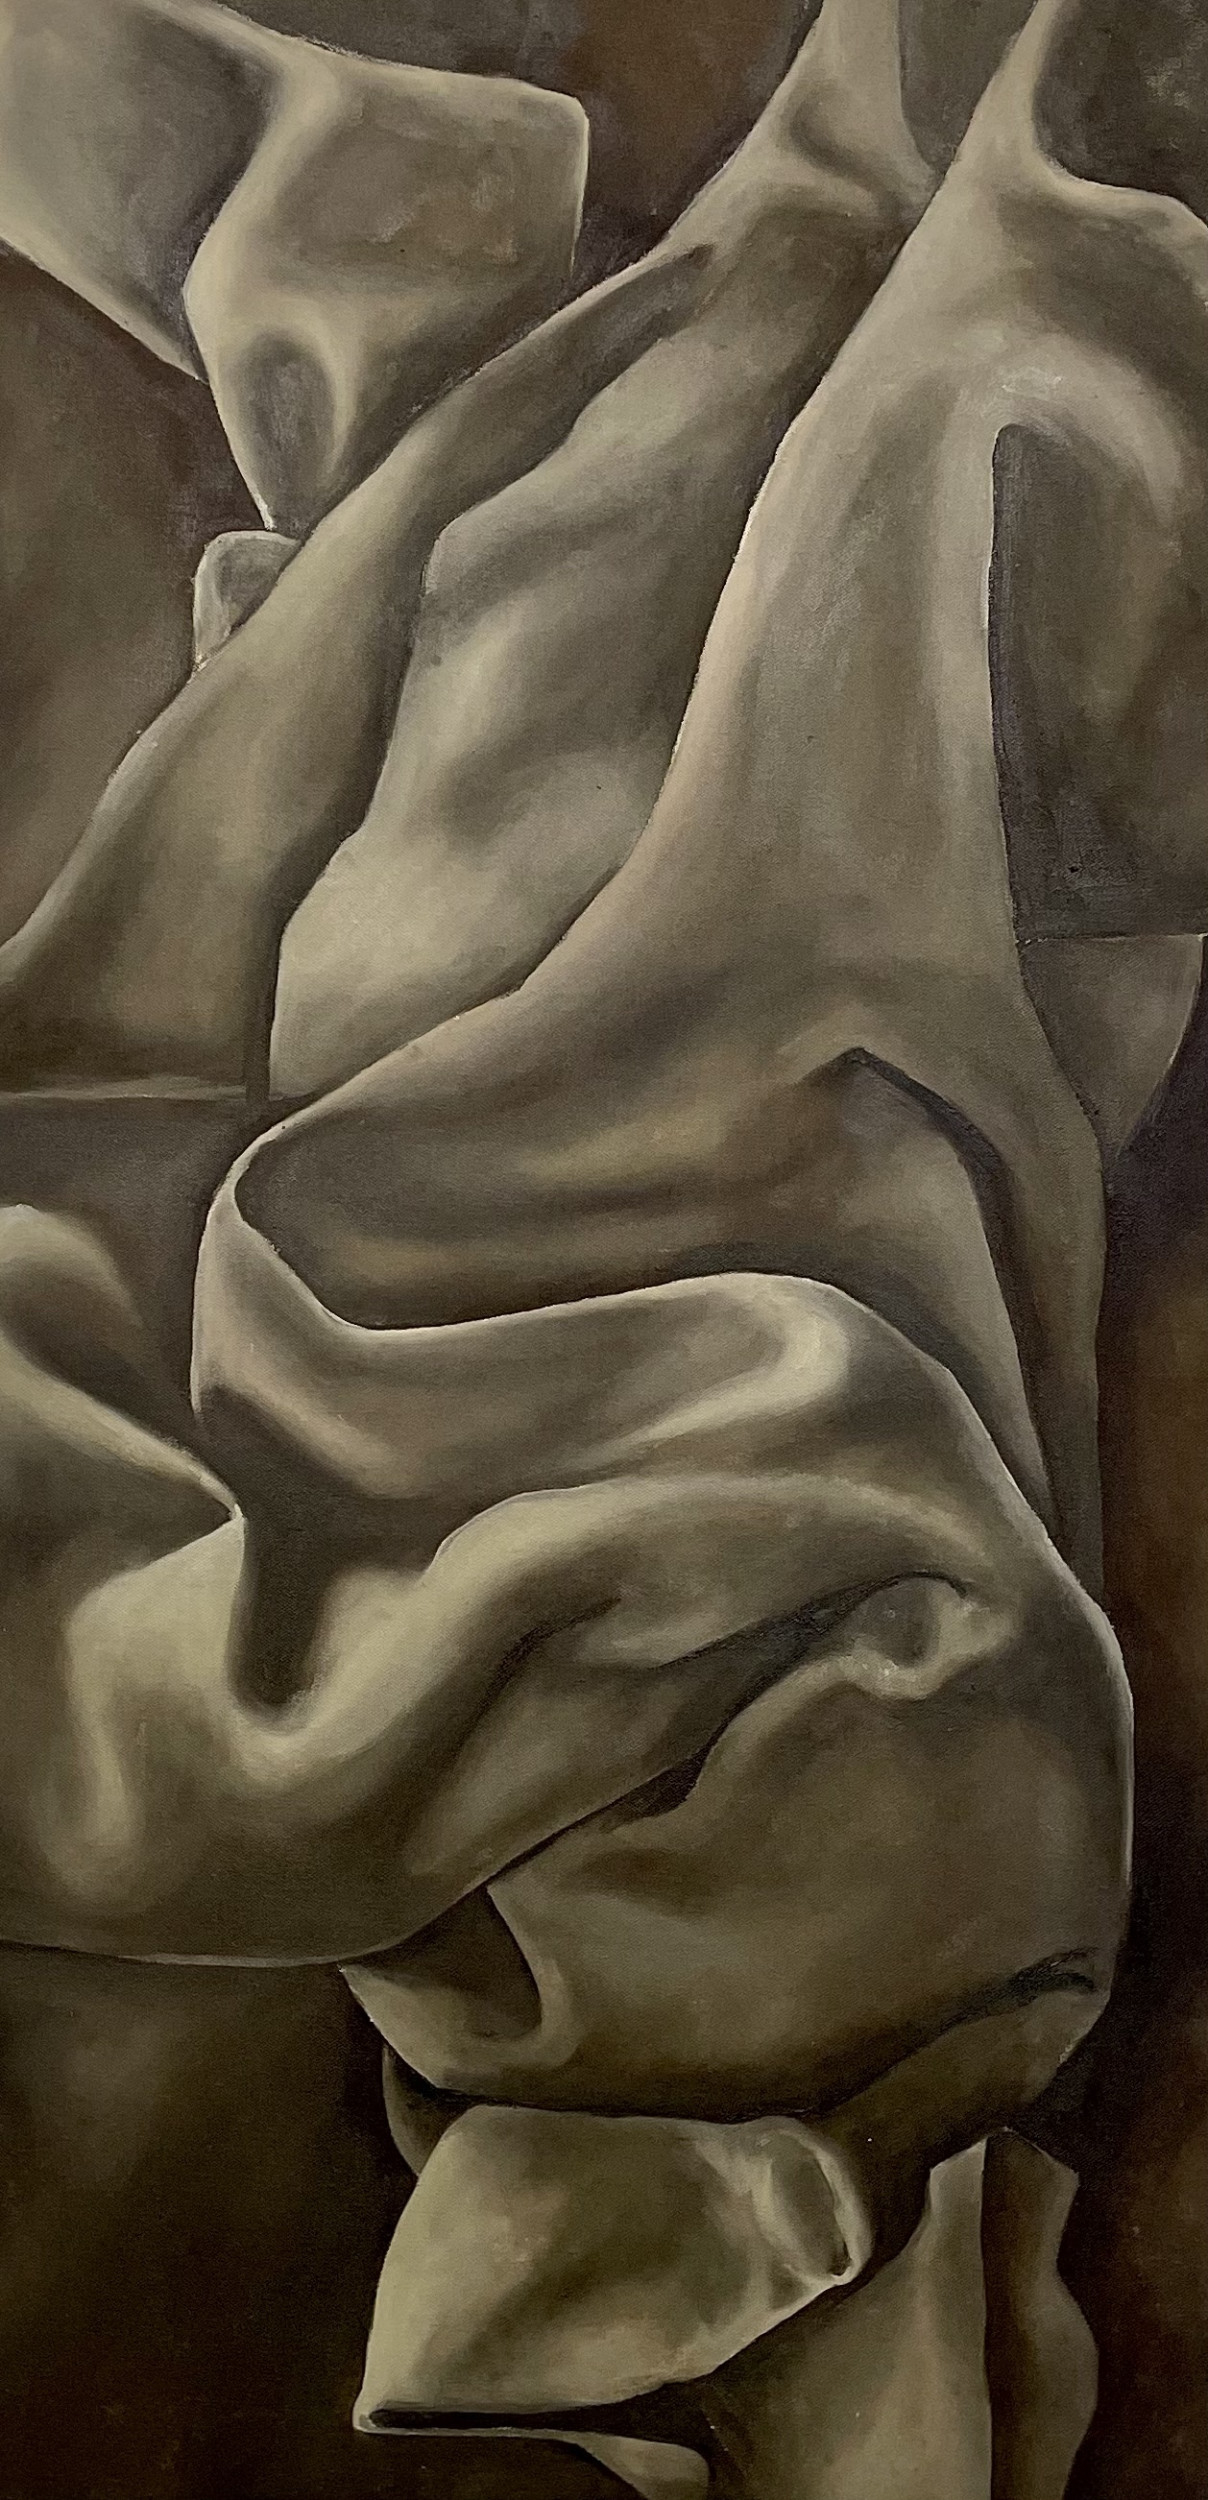 *Bed Sheets No. 5*, oil on canvas, 50cm x 100cm